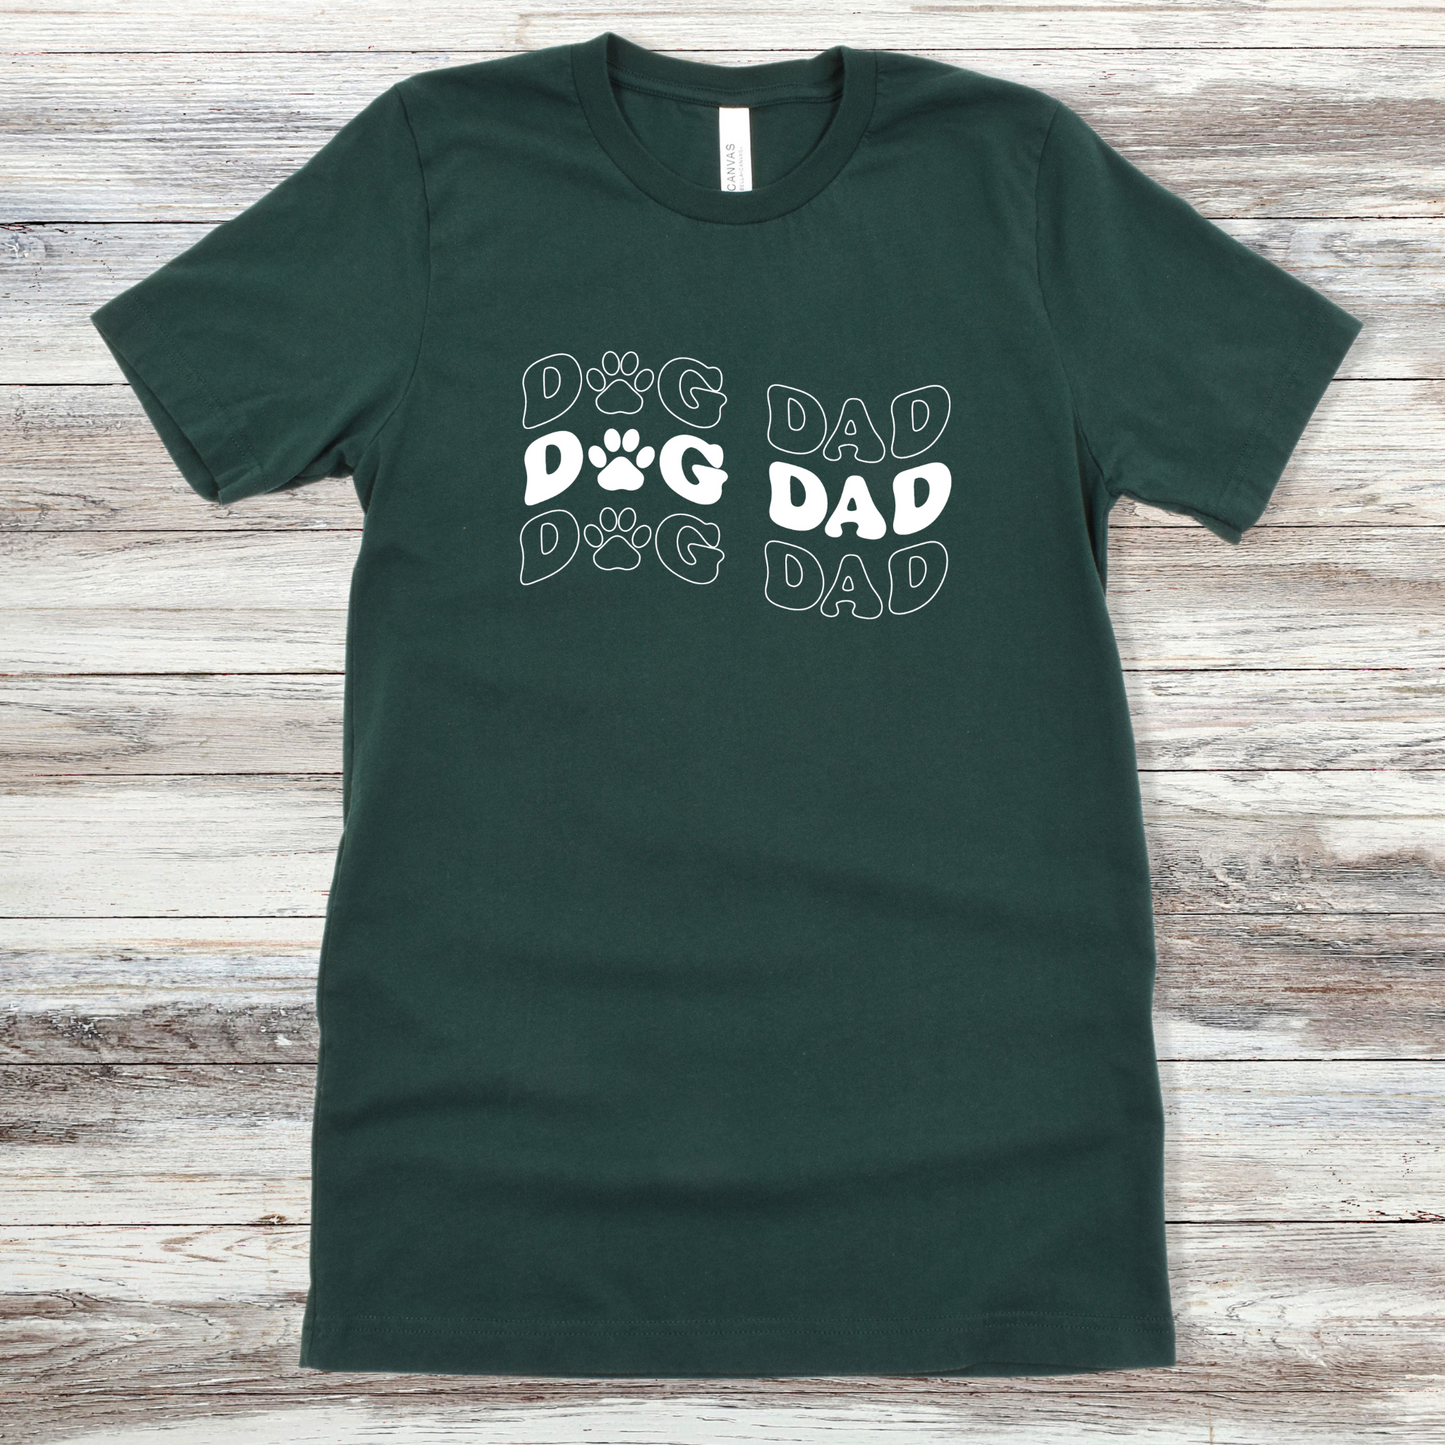 Text reading "Dog Dad" on a Forest Tee